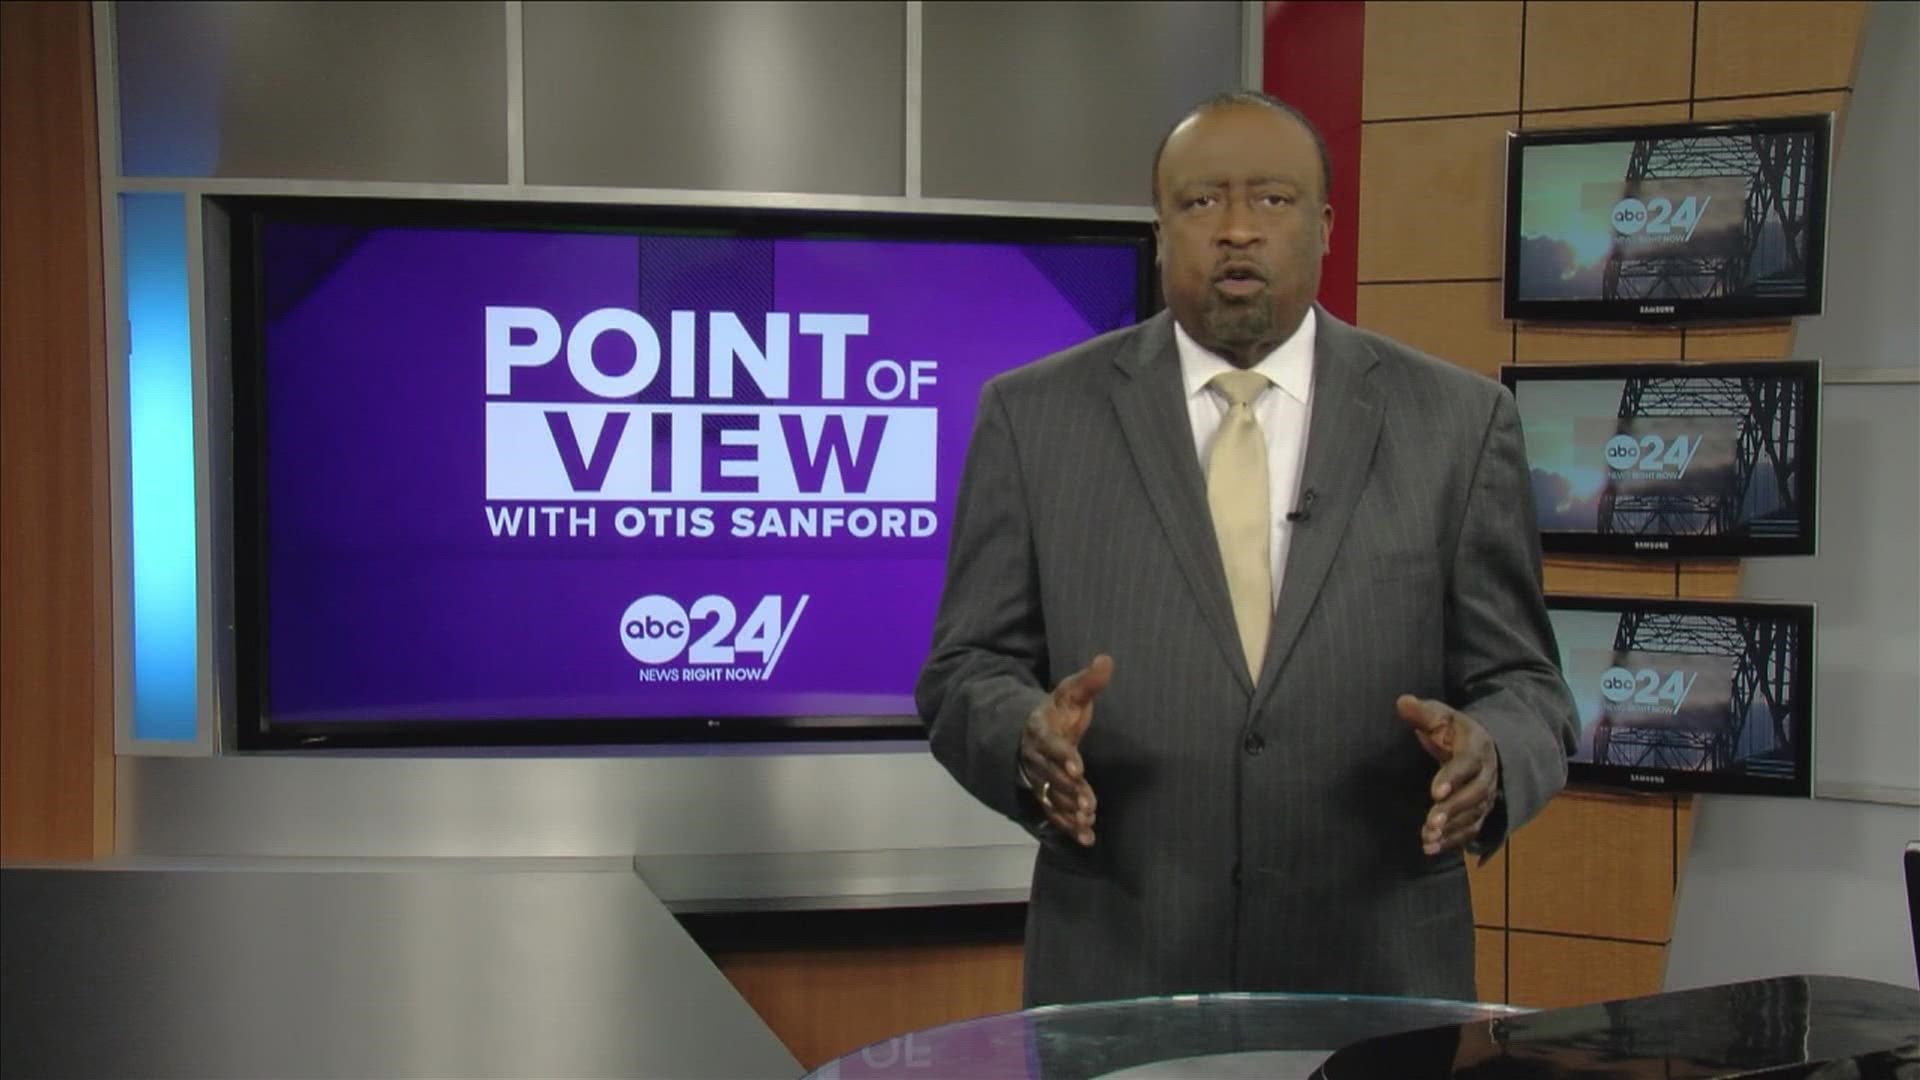 ABC24 political analyst and commentator Otis Sanford shared his point of view on the latest ruling over school vouchers in Tennessee.